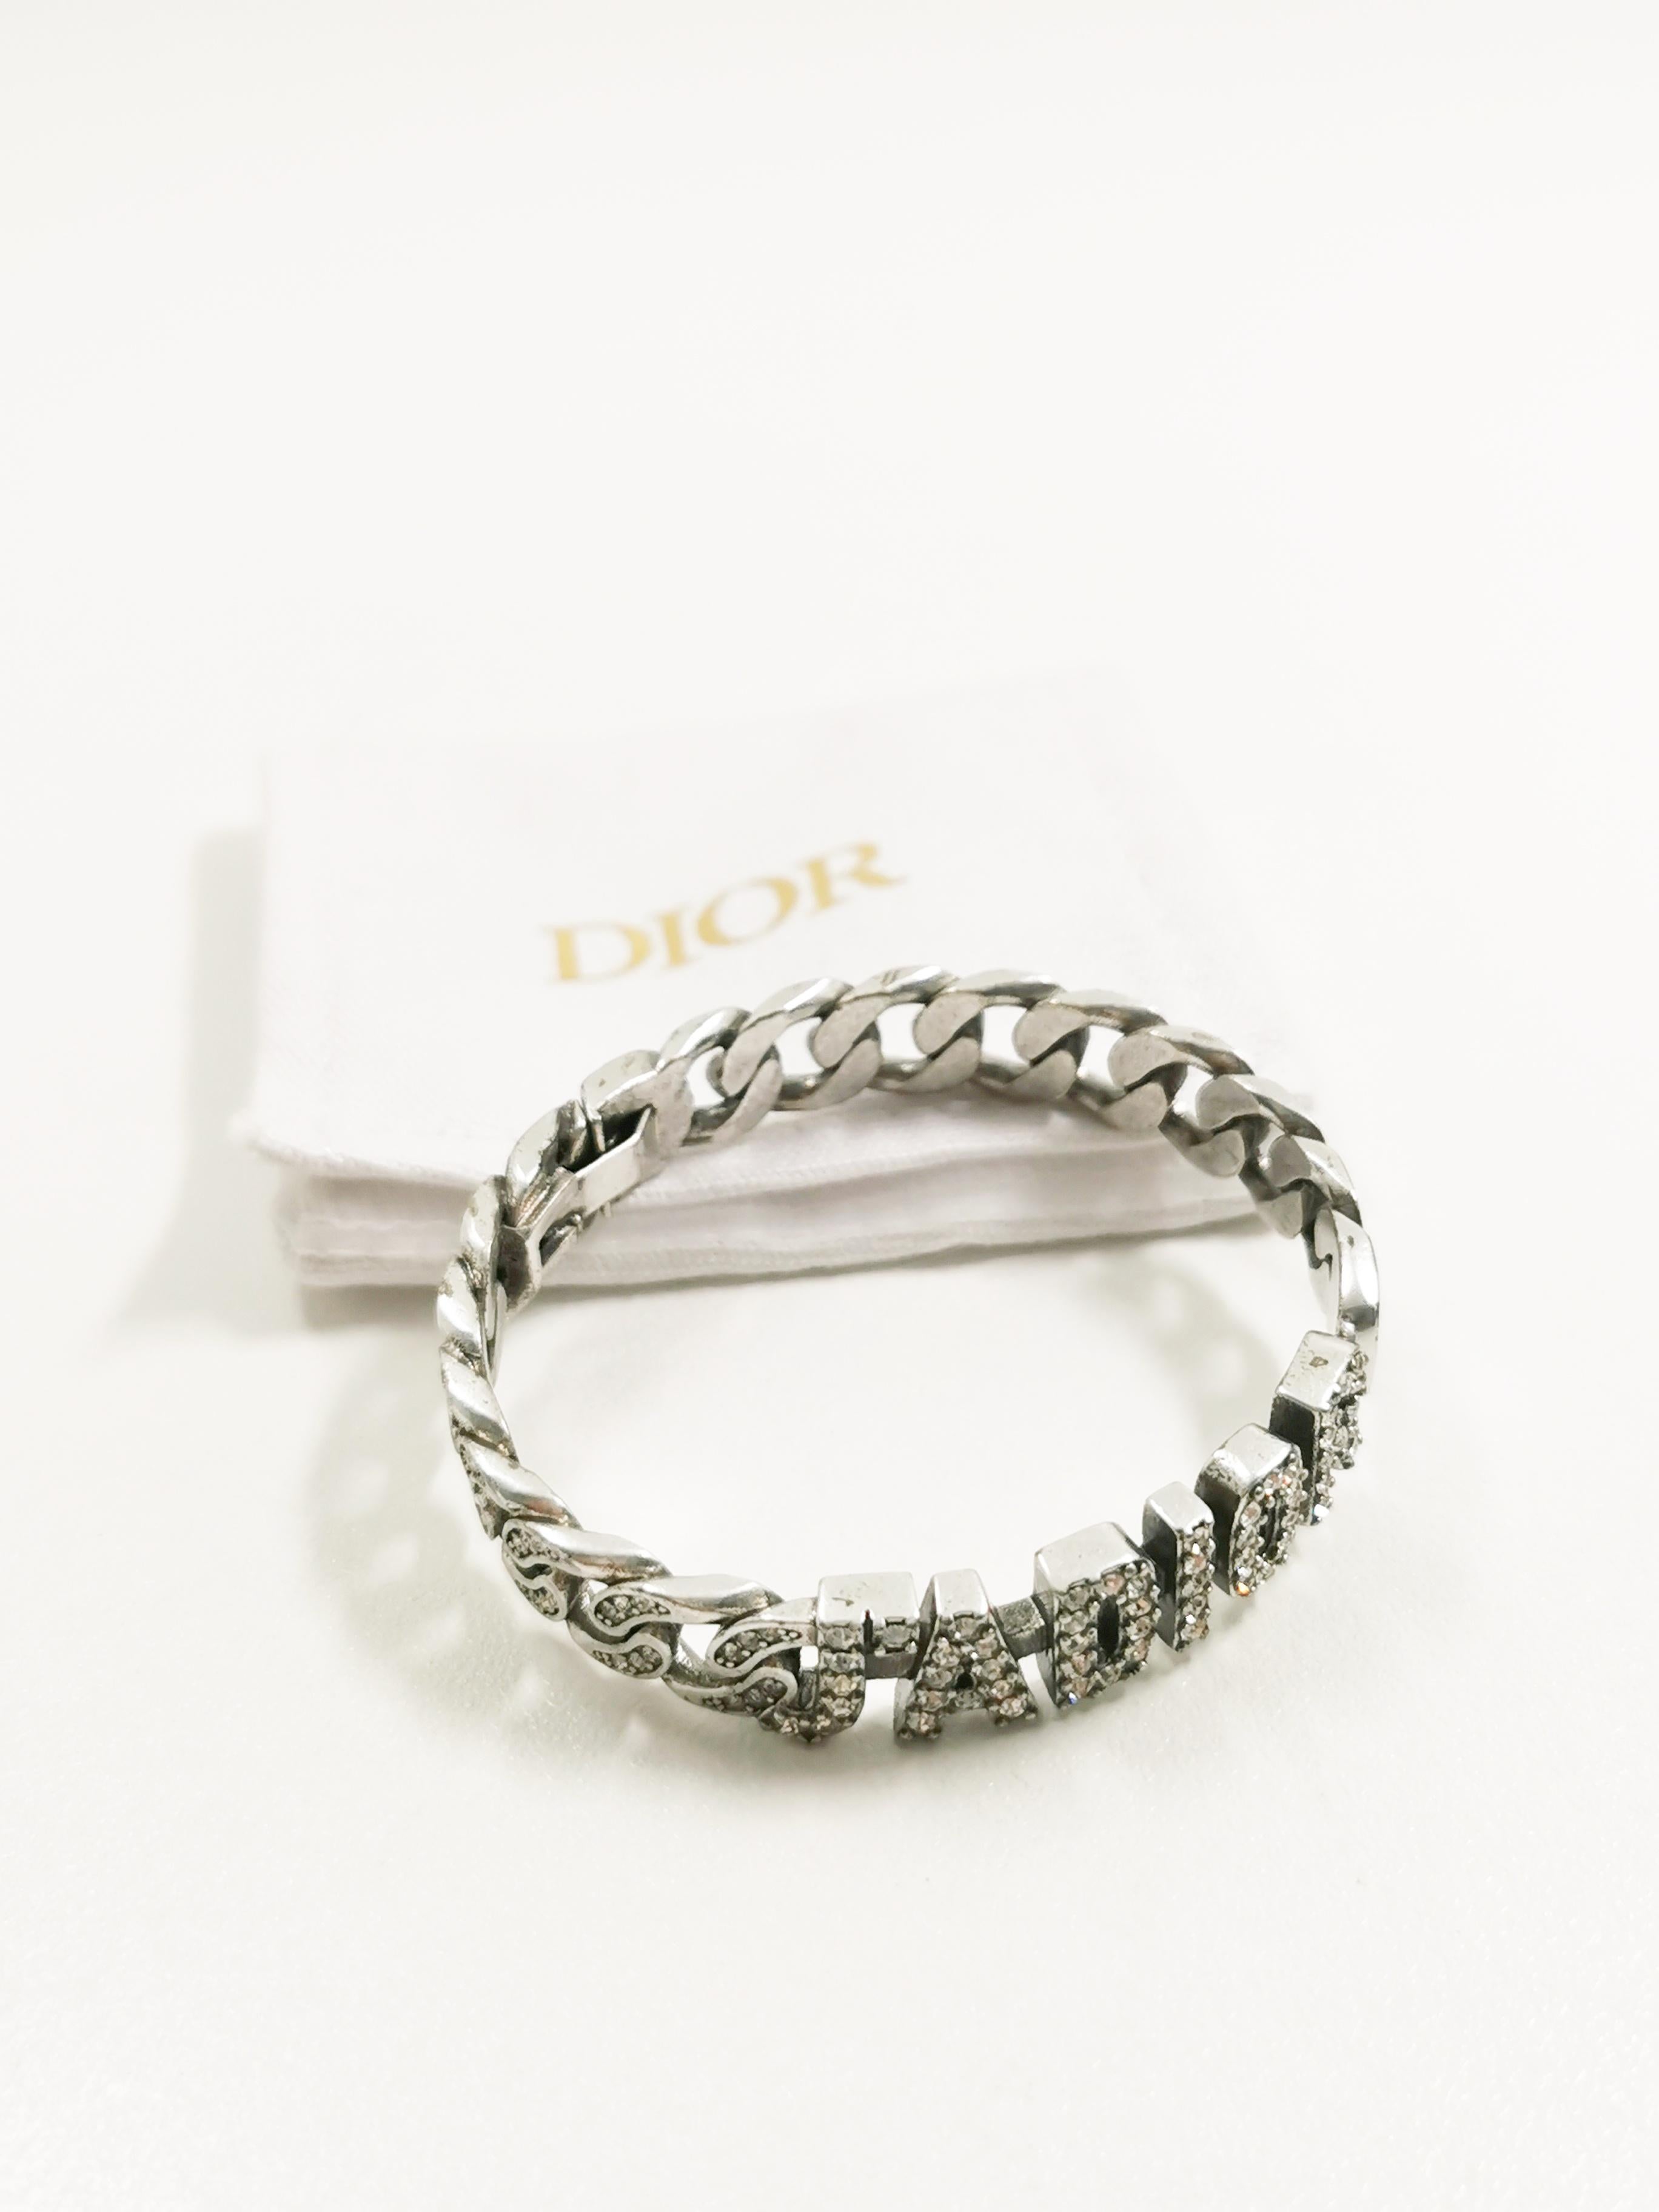 The Christian Dior J'adior Alphabet Rhinestones Cuff Silver Bangle Bracelet is an exquisite and luxurious piece of jewelry that seamlessly combines the iconic Dior style with a touch of personalization. This bangle bracelet is a part of the renowned